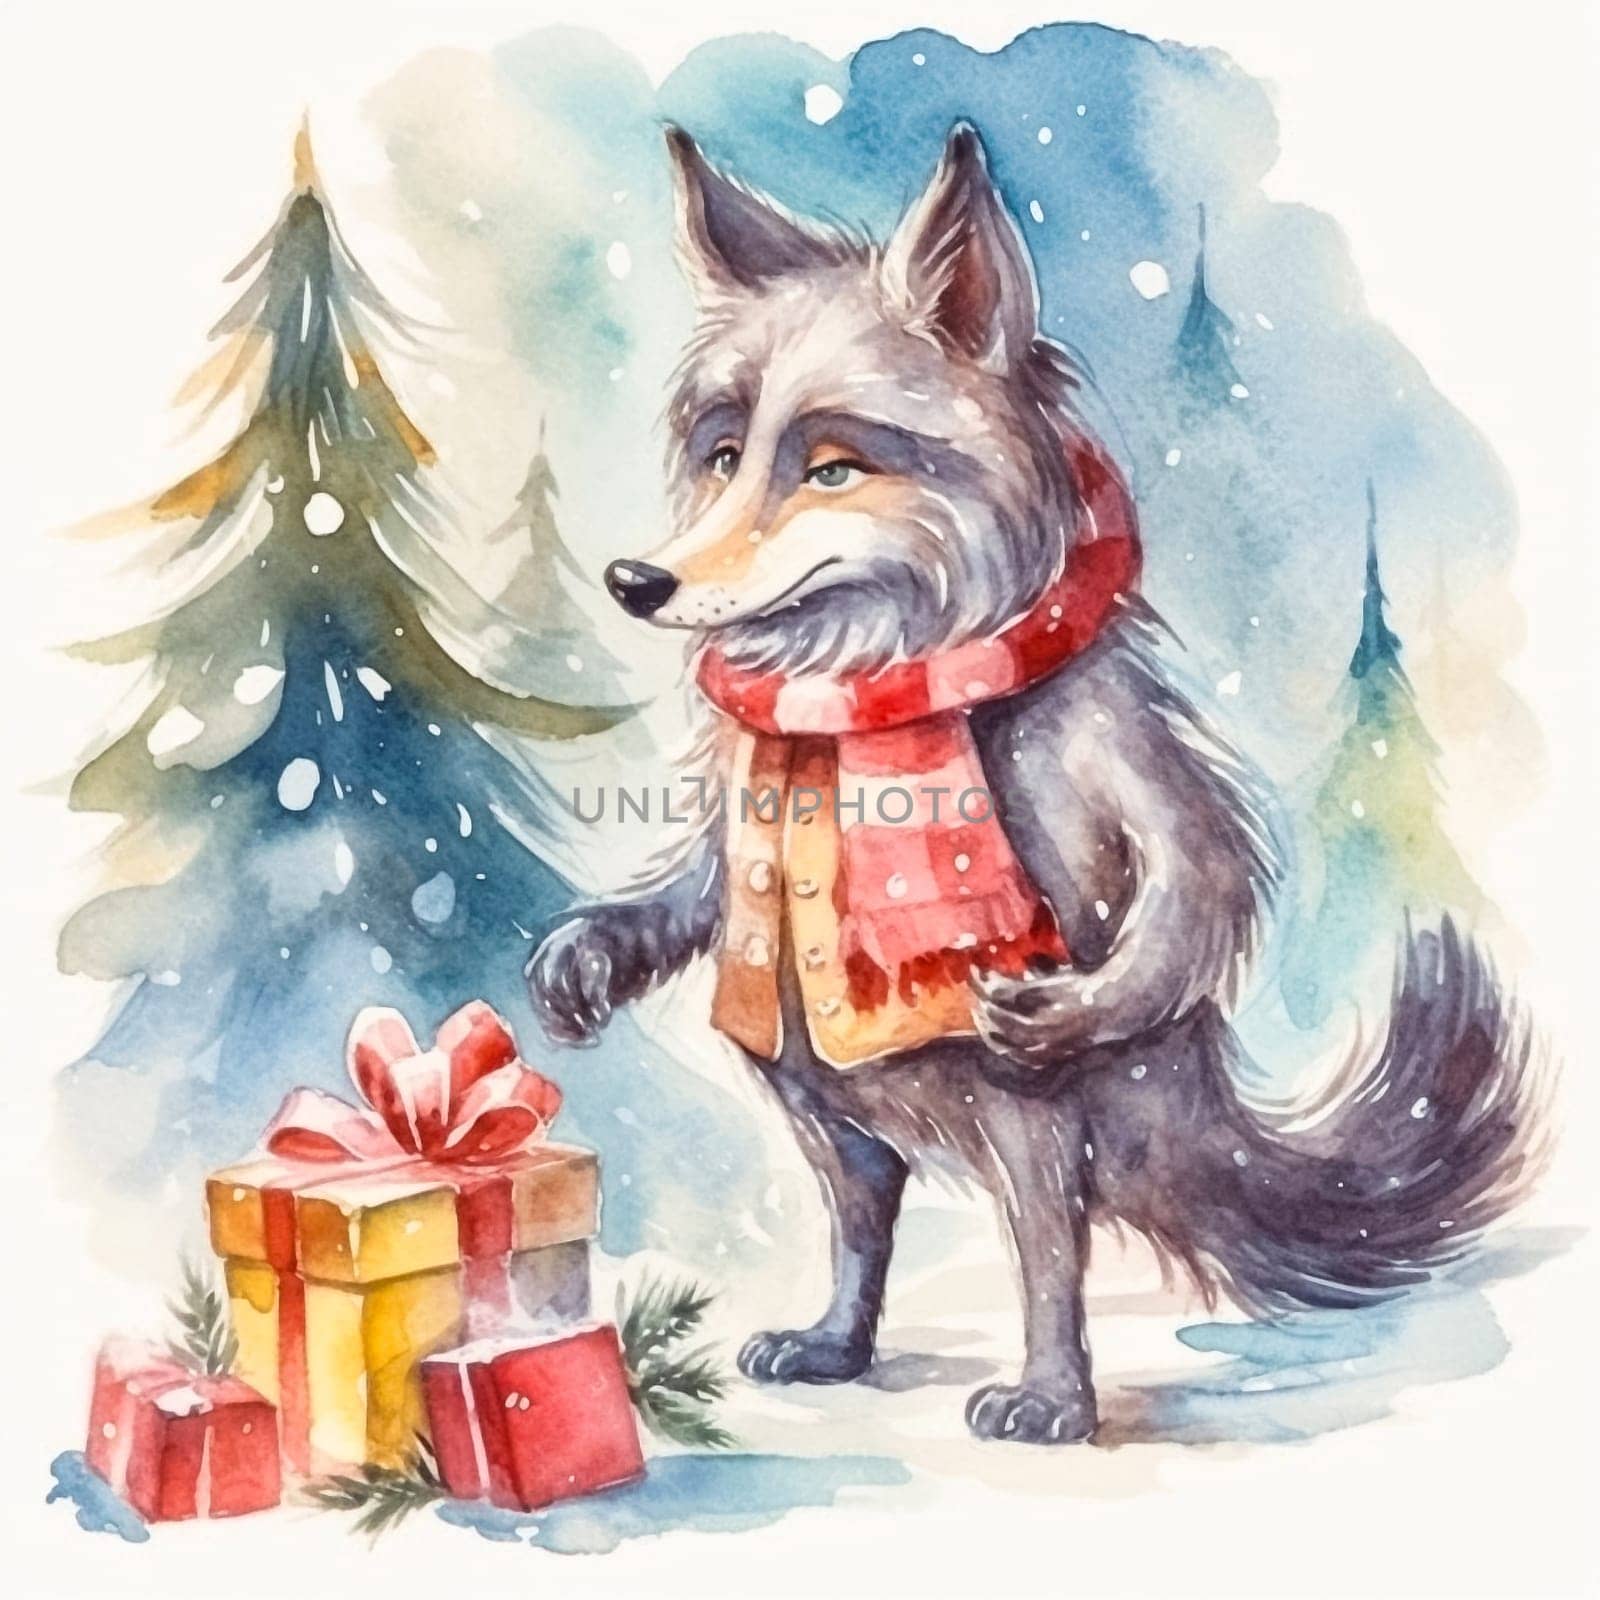 wolf with gifts on background of Christmas tree, winter holidays concept